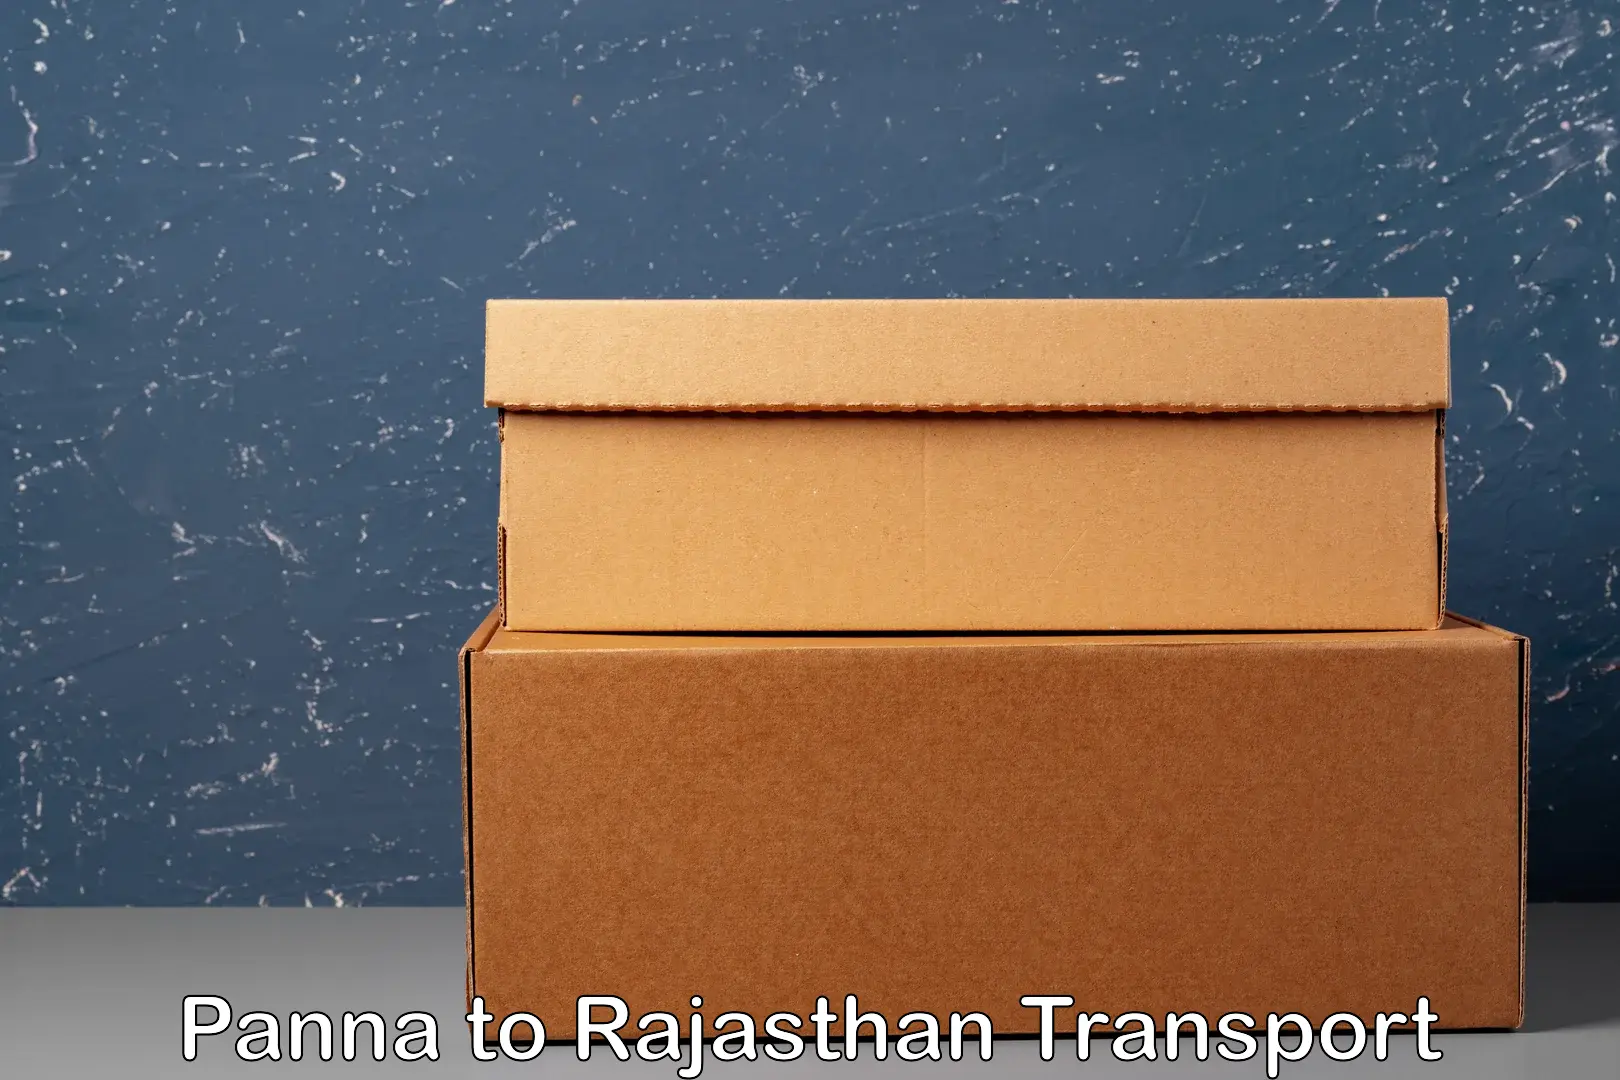 Air freight transport services Panna to Rajasthan